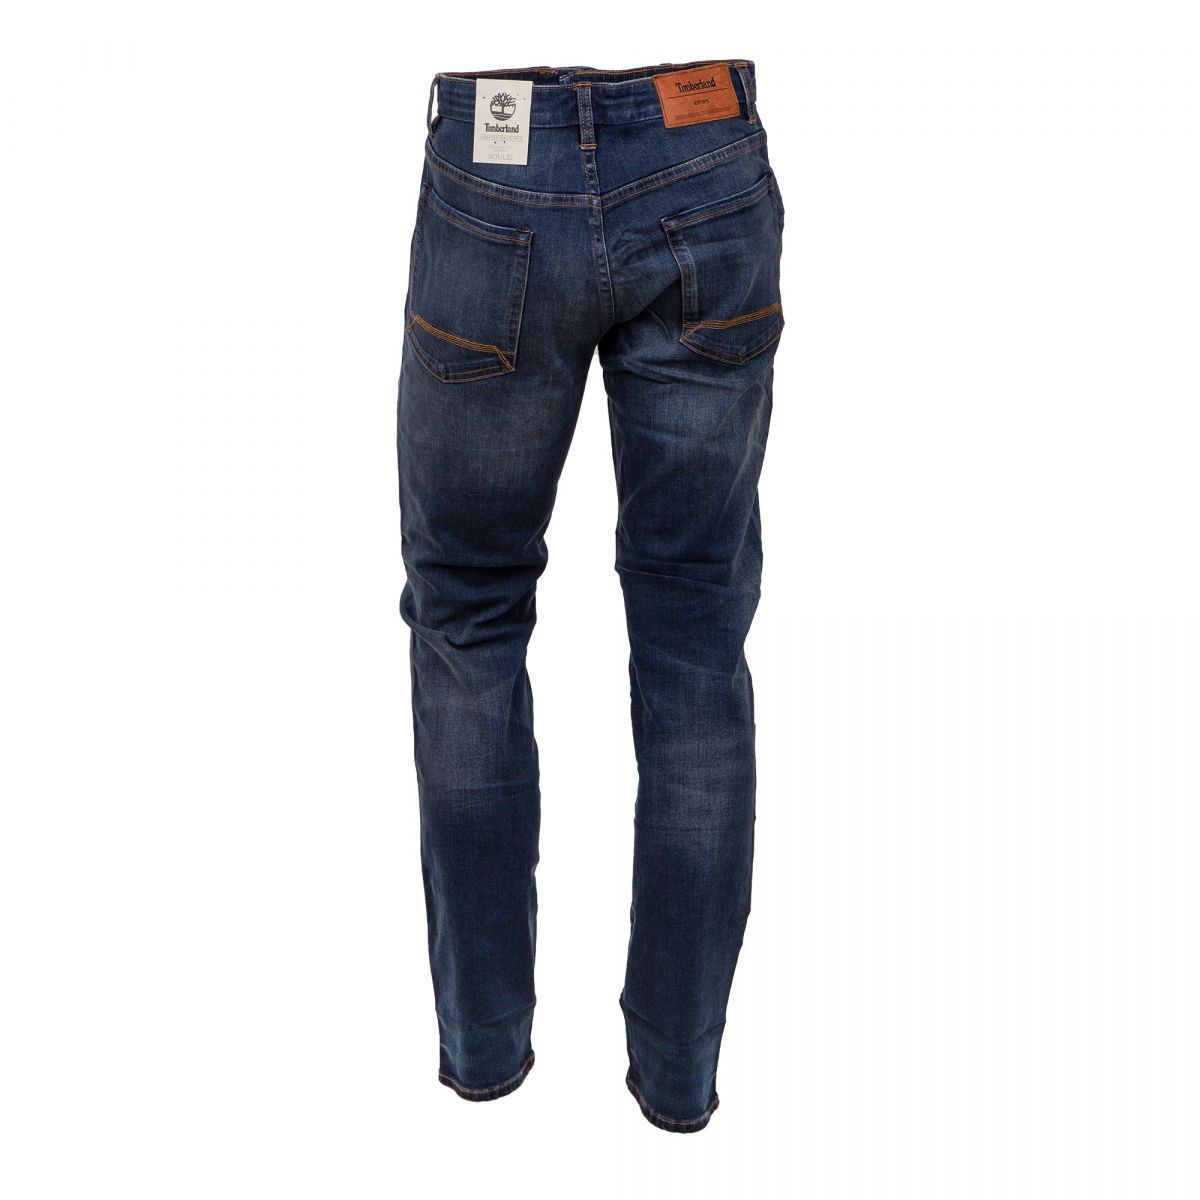 jean timberland homme